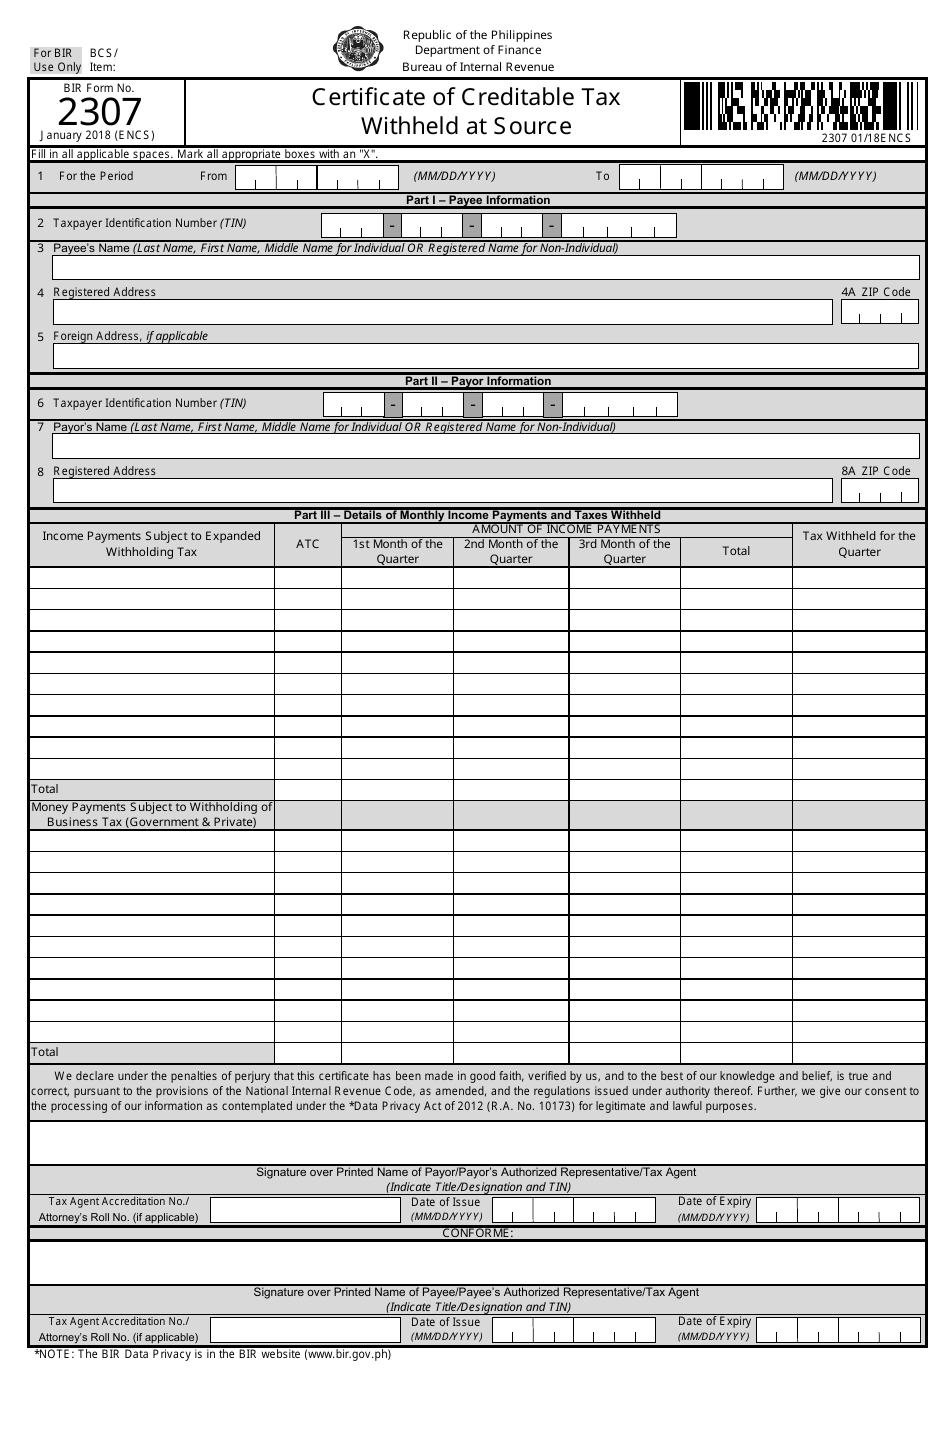 BIR Form 2307 Certificate of Creditable Tax Withheld at Source - Philippines, Page 1